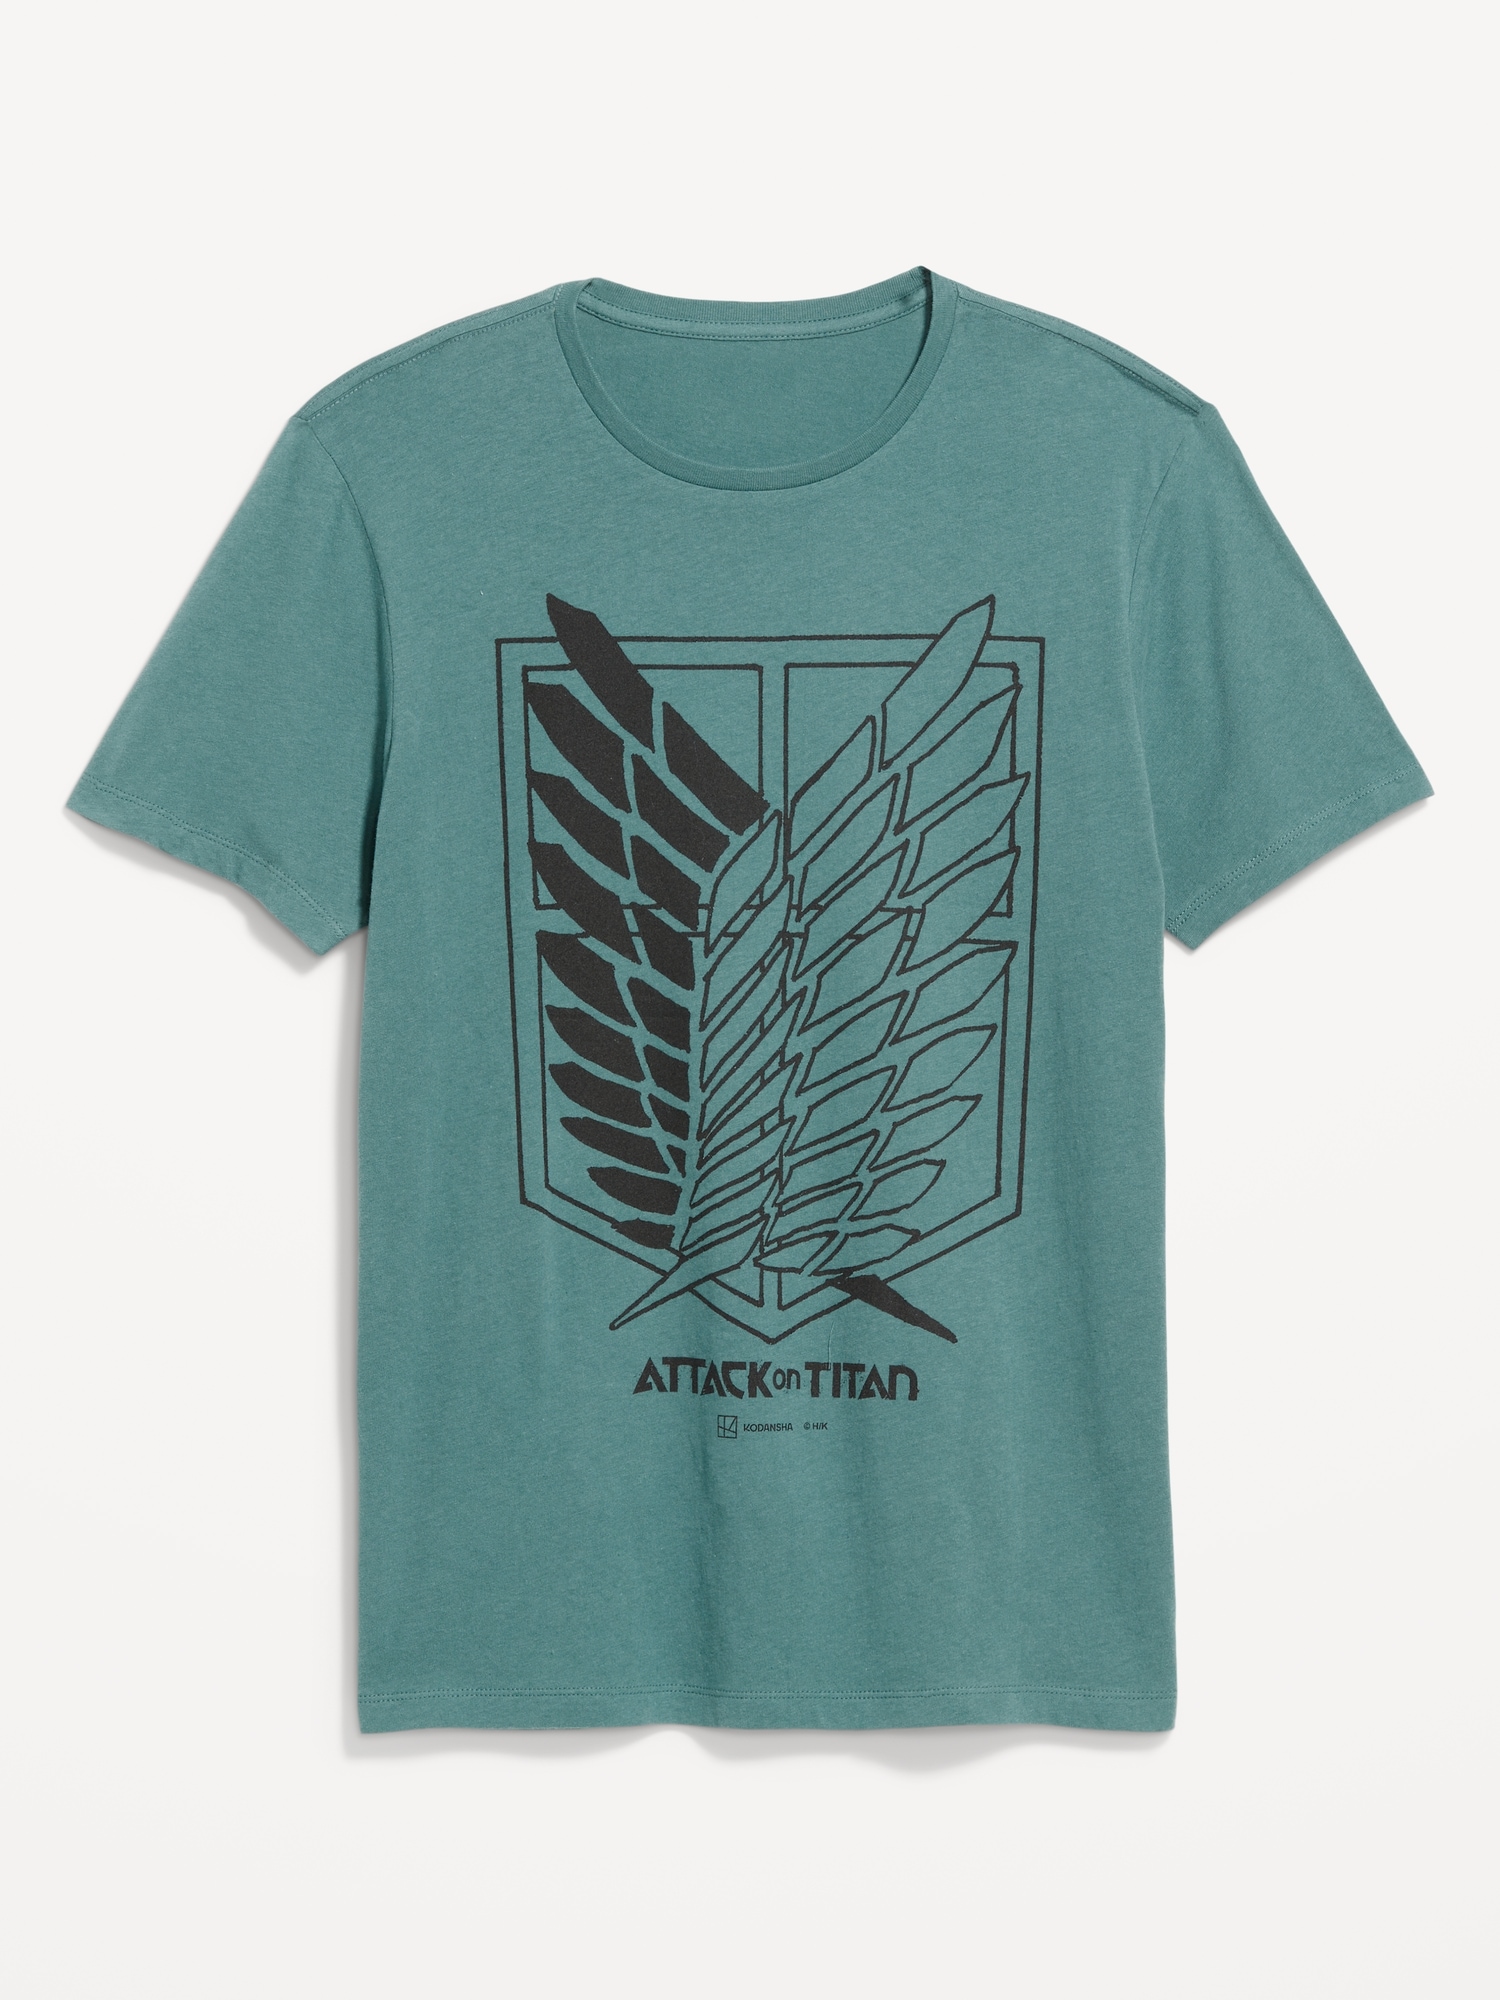 Attack on Titan Gender-Neutral T-Shirt for Adults